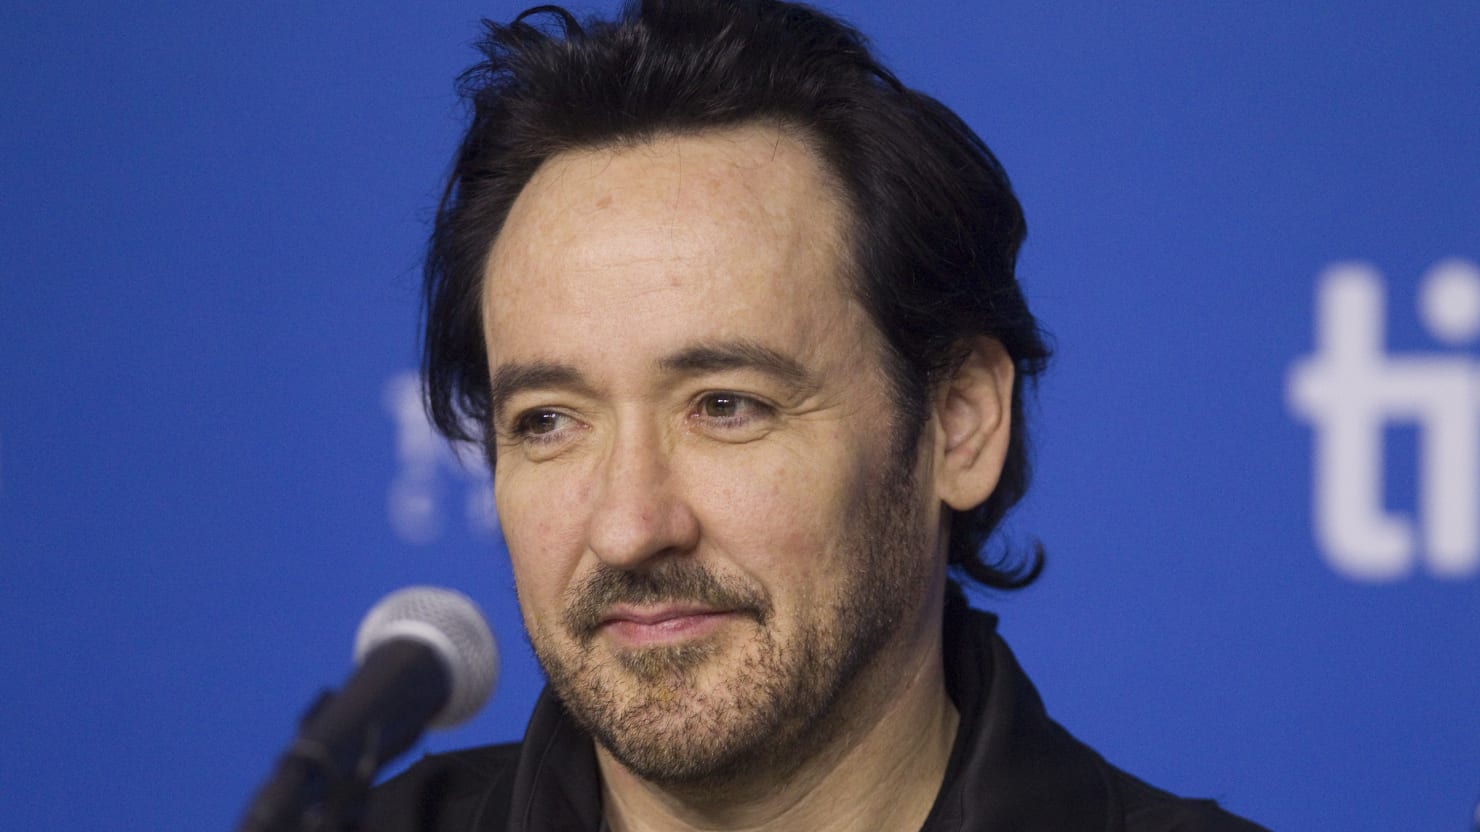 John Cusack Shares Anti-Semitic Meme on Twitter, Quickly Deletes